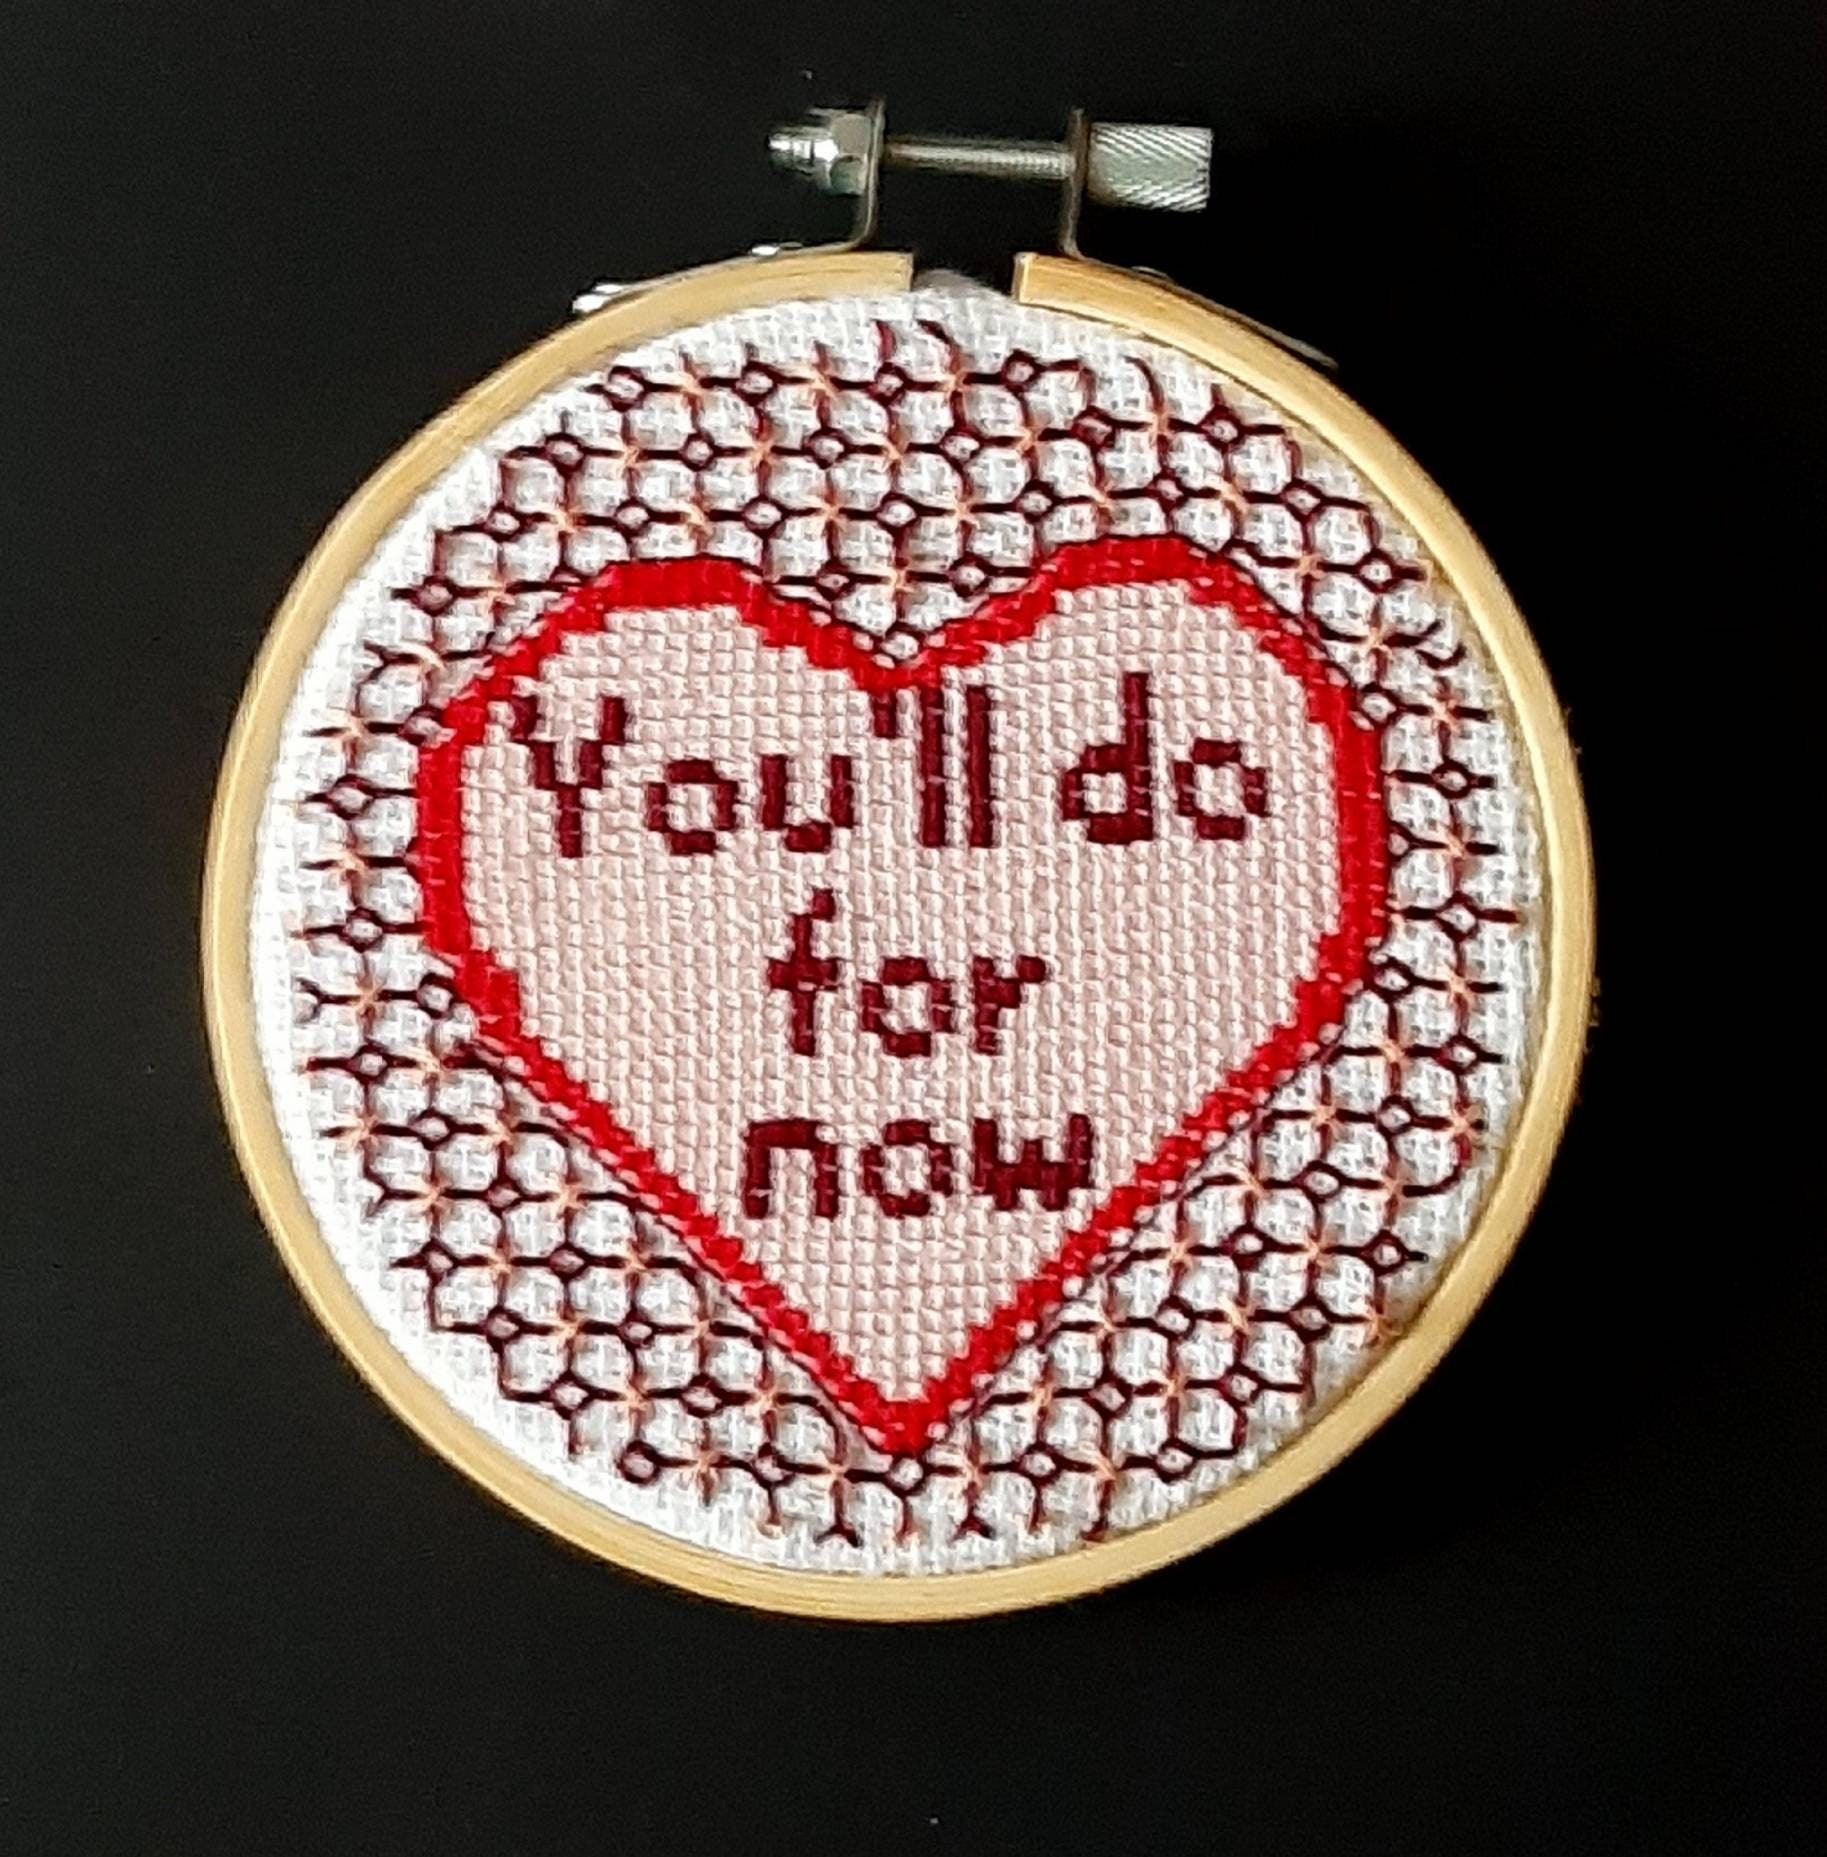 You'll do for now, funny anniversary gift, completed cross stitch quote - Thistleflat Crafts